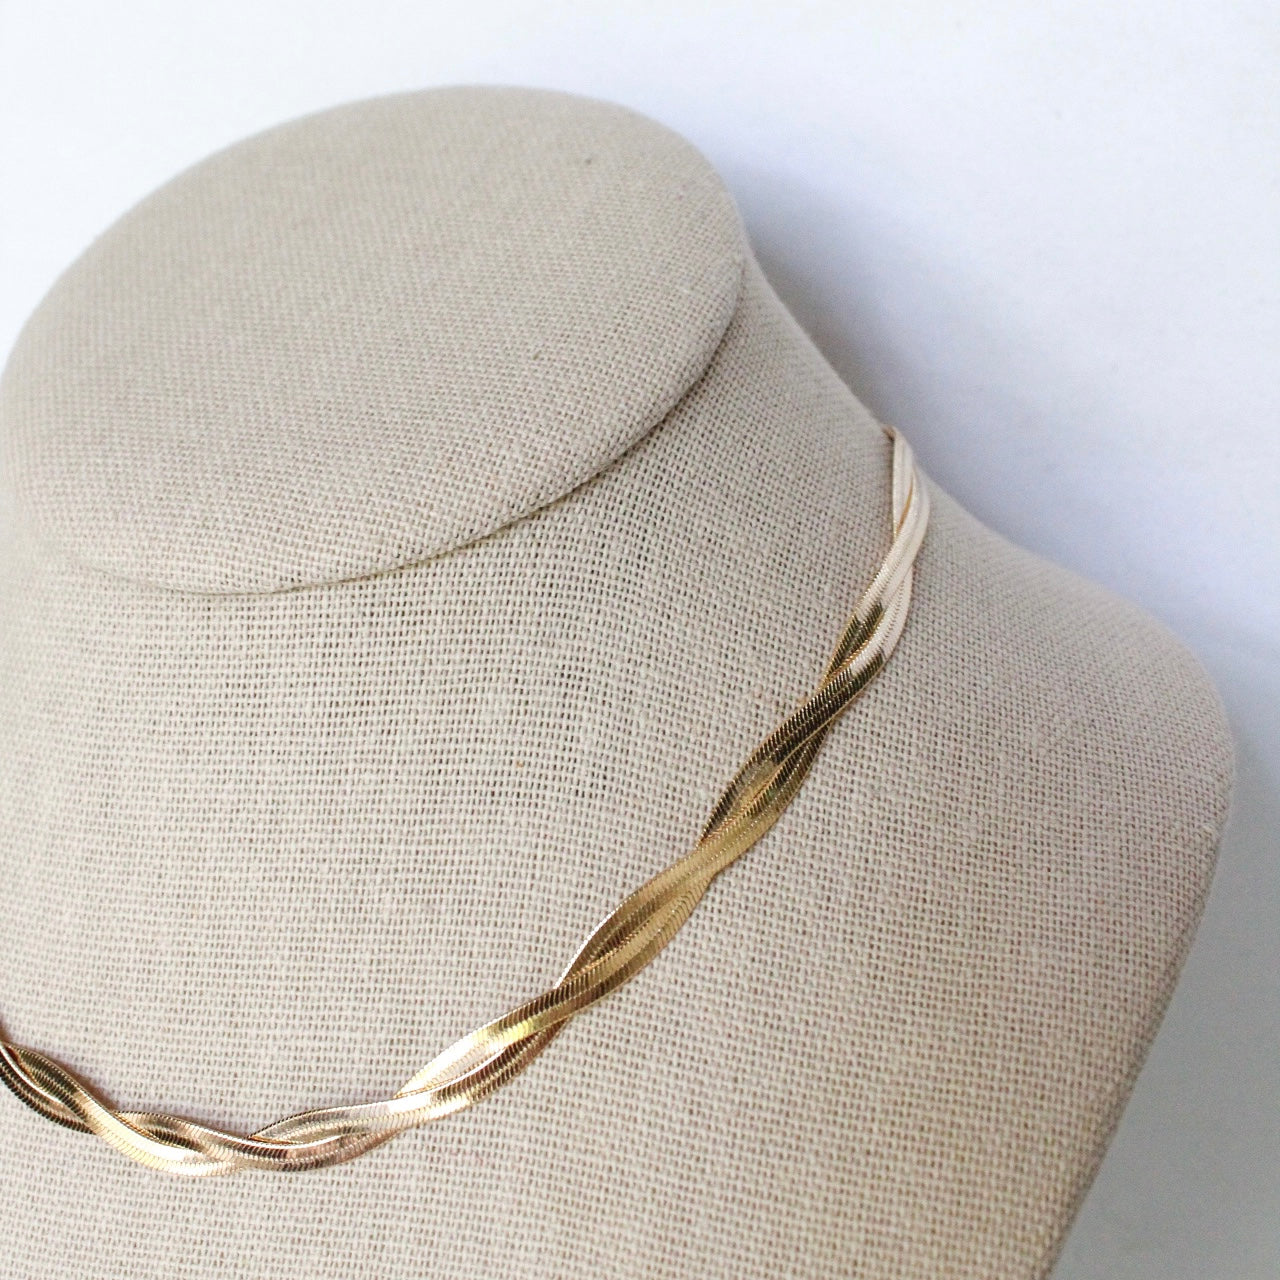 Diamond-Cut Braided Herringbone Necklace in 10K Gold | Zales Outlet